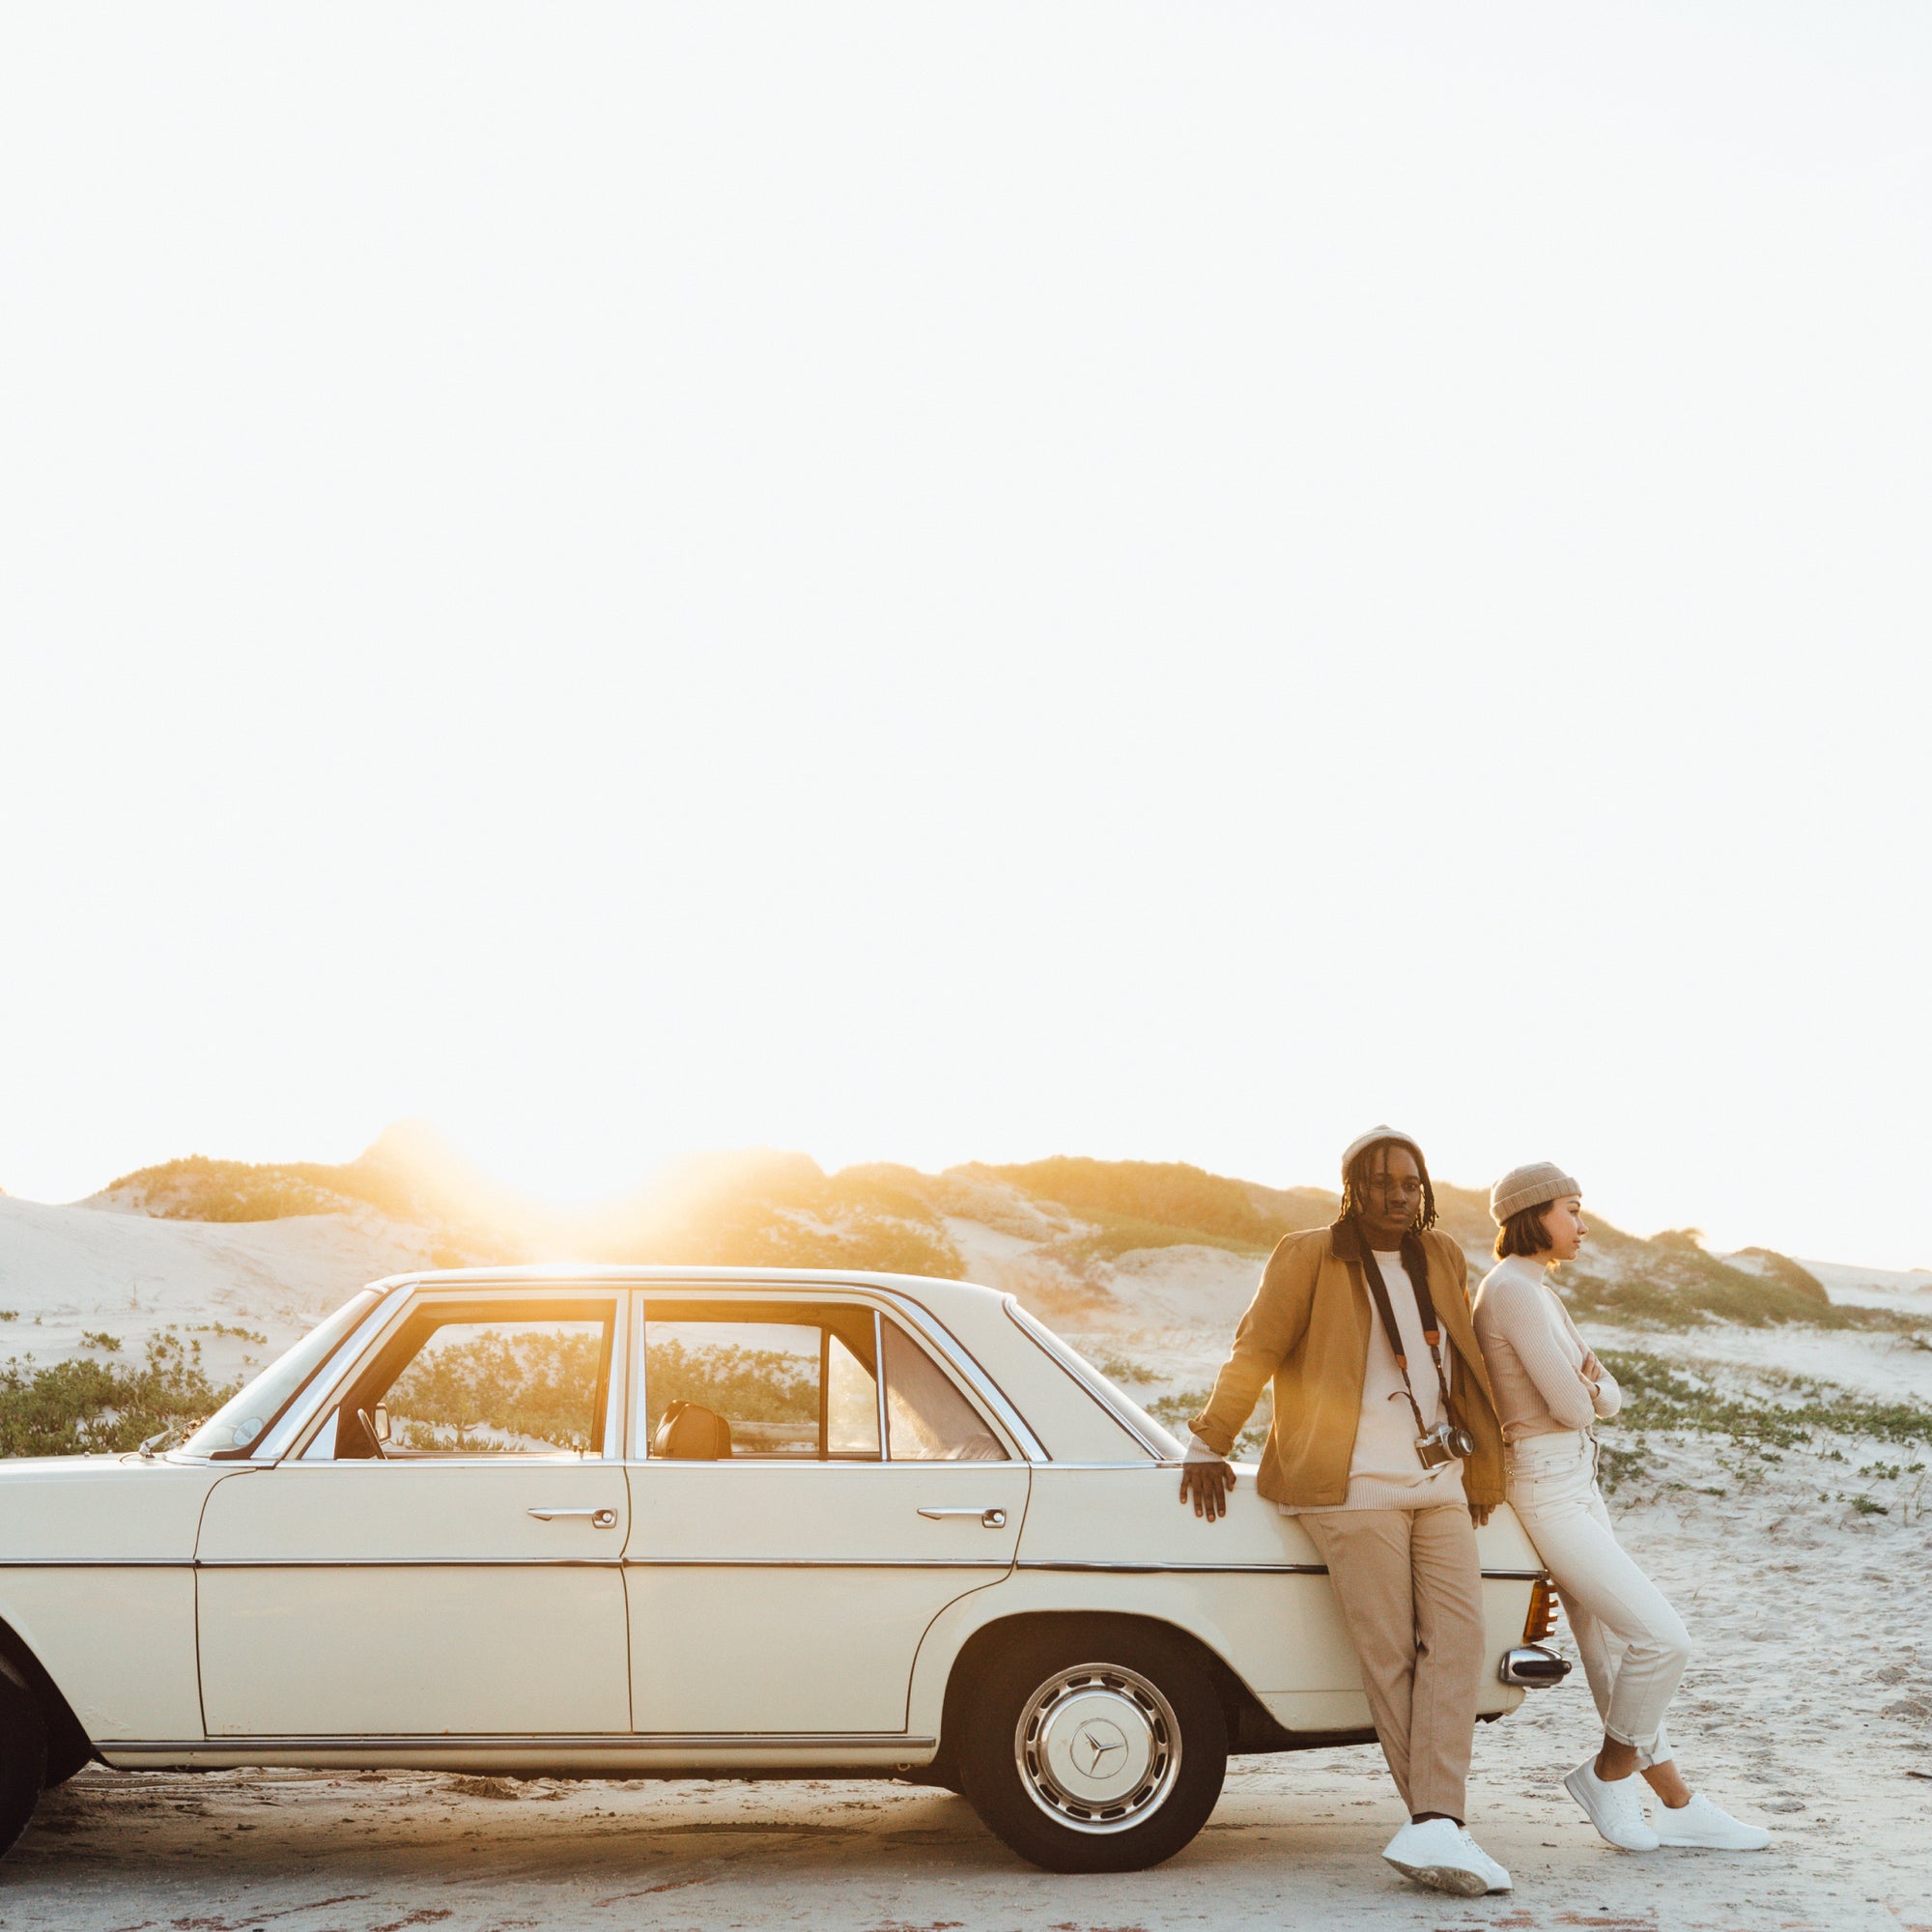 A man and a woman lean against the bonnet of a car parked on the beach, the man has a camera hanging around his neck